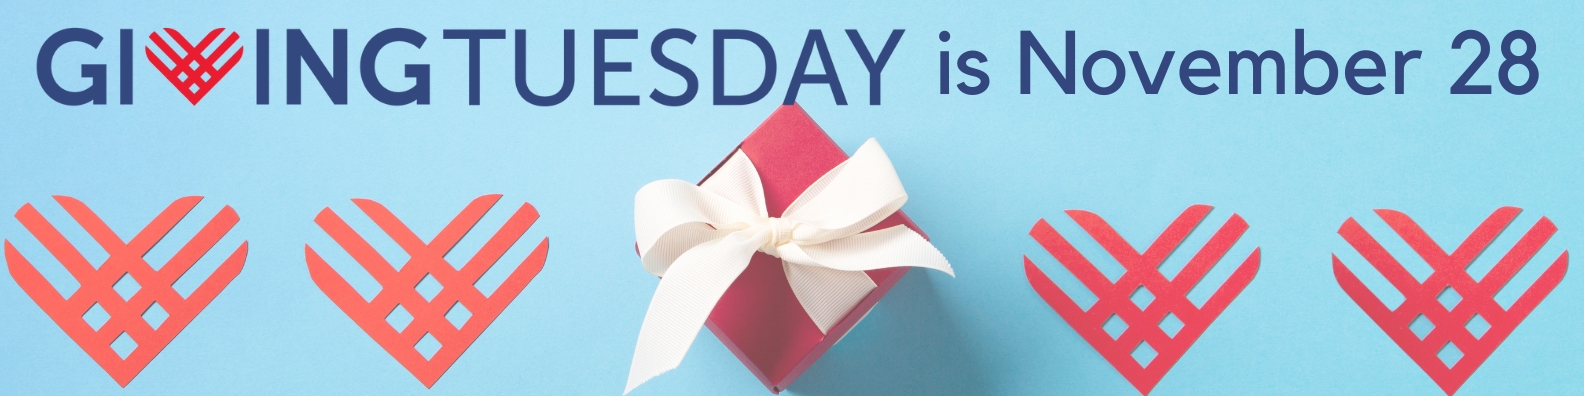 banner with Giving Tuesday logo